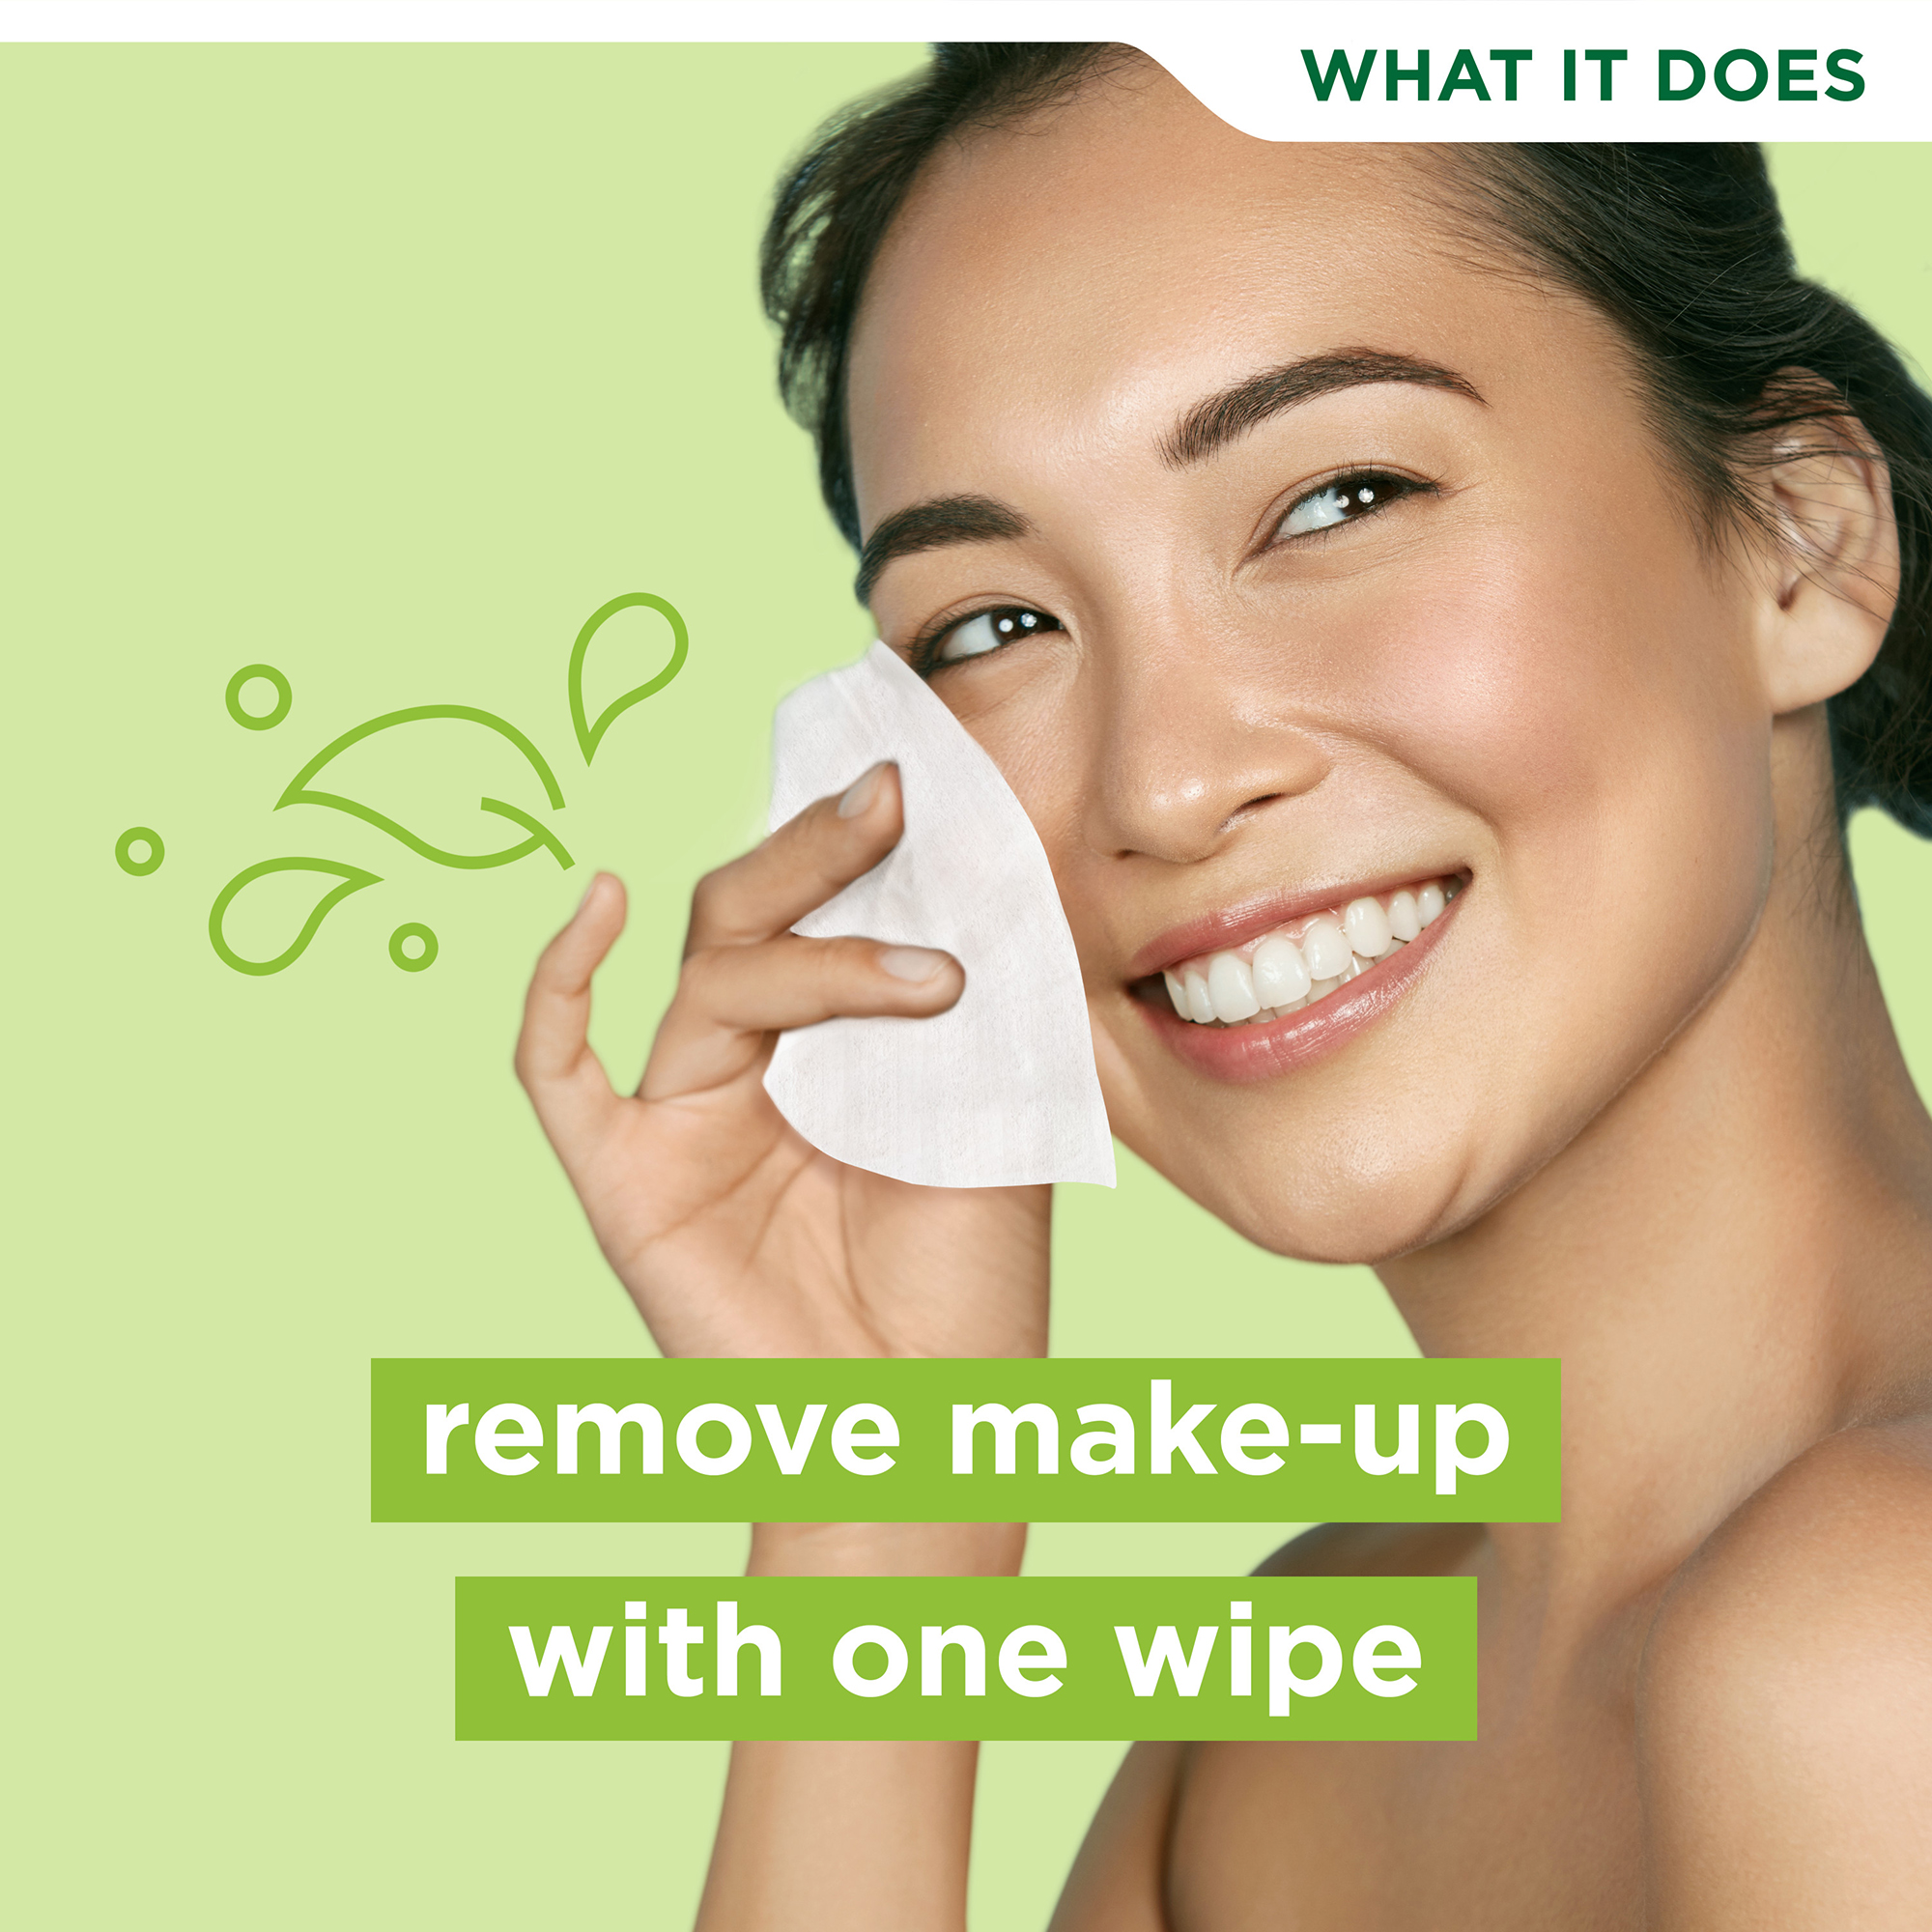 Simple Kind to Skin Facial Wipes Cleansing Free from color and dye, artificial perfume and harsh chemicals Gentle and Effective Makeup Remover 25 Wipes - image 2 of 12